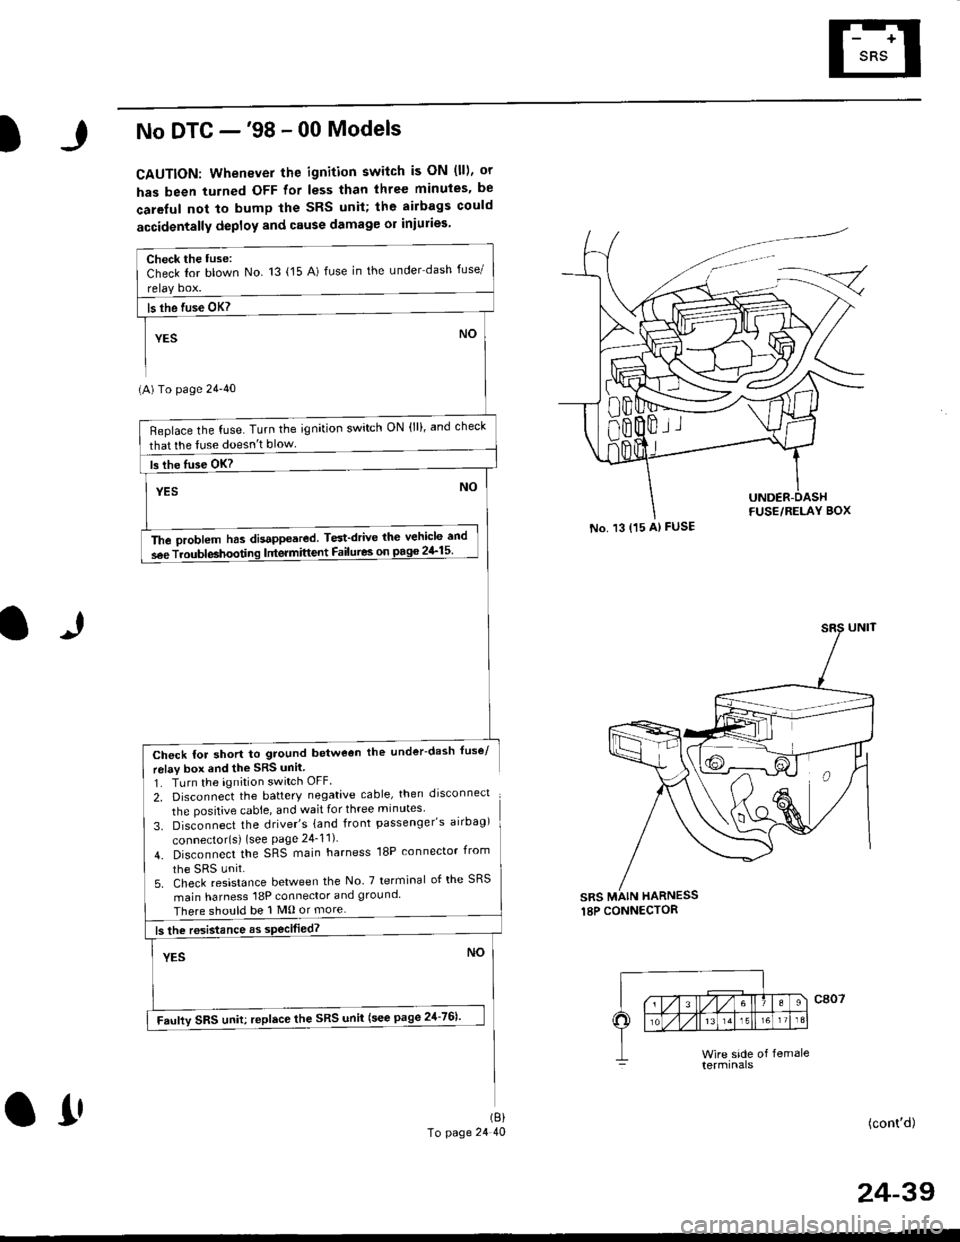 HONDA CIVIC 1996 6.G Service Manual .J
No DTC -98 - 00 Models
CAUTION: Whenever the ignition switch is ON (ll), or
has been turned OFF for less than three minuies. be
careful not to bump the SRS unil; the airbags could
accidentally dep